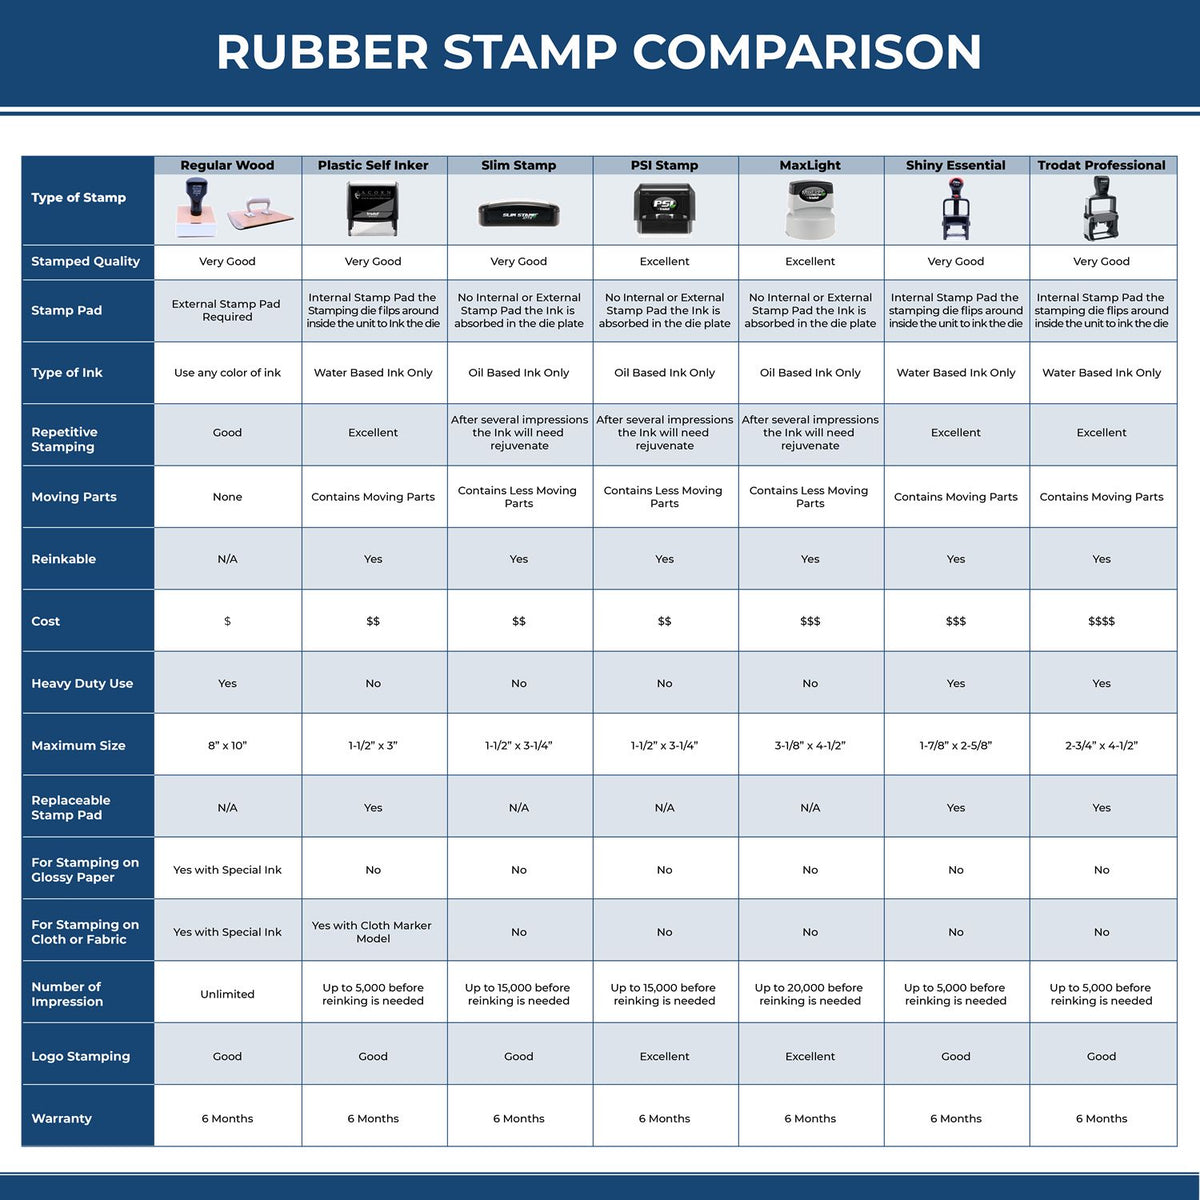 A comparison chart for the different types of mount models available for the Wooden Handle West Virginia State Seal Notary Public Stamp.